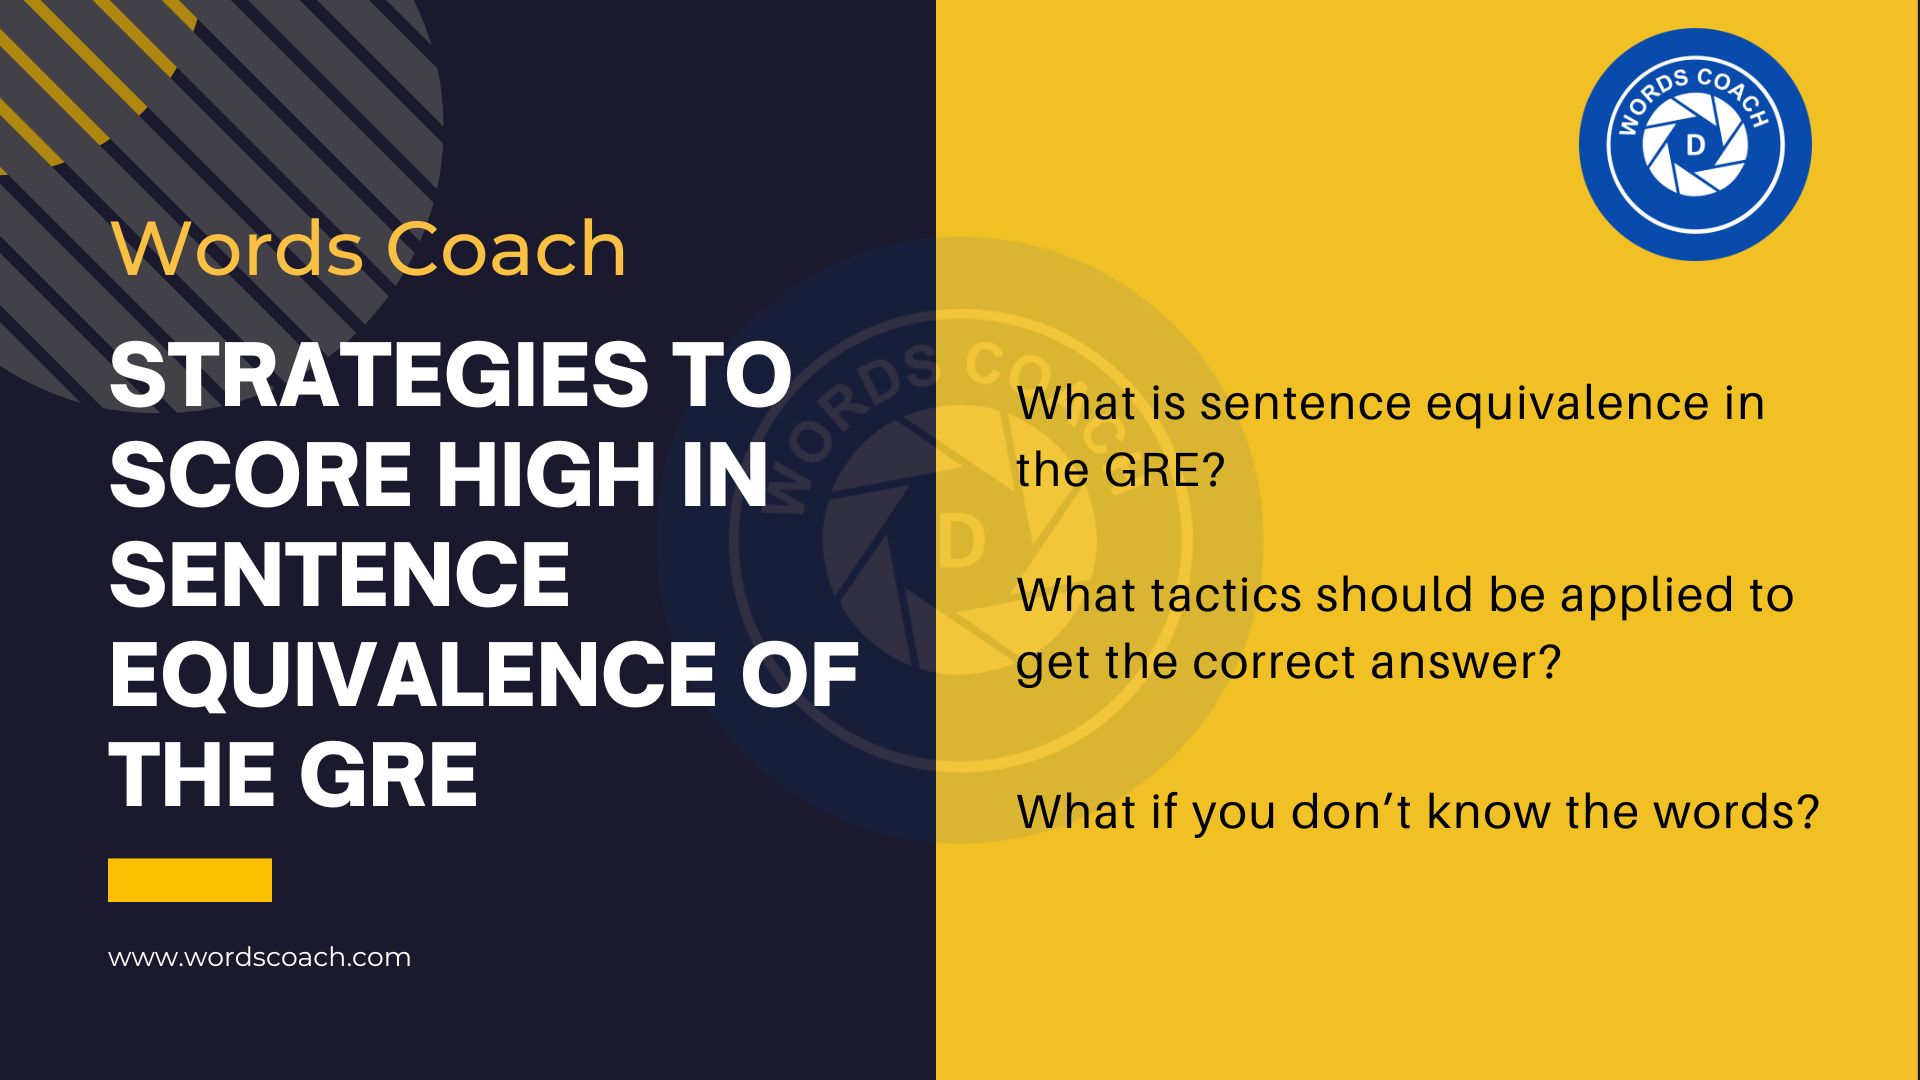 Strategies to score high in Sentence Equivalence of the GRE - wordscoach.com